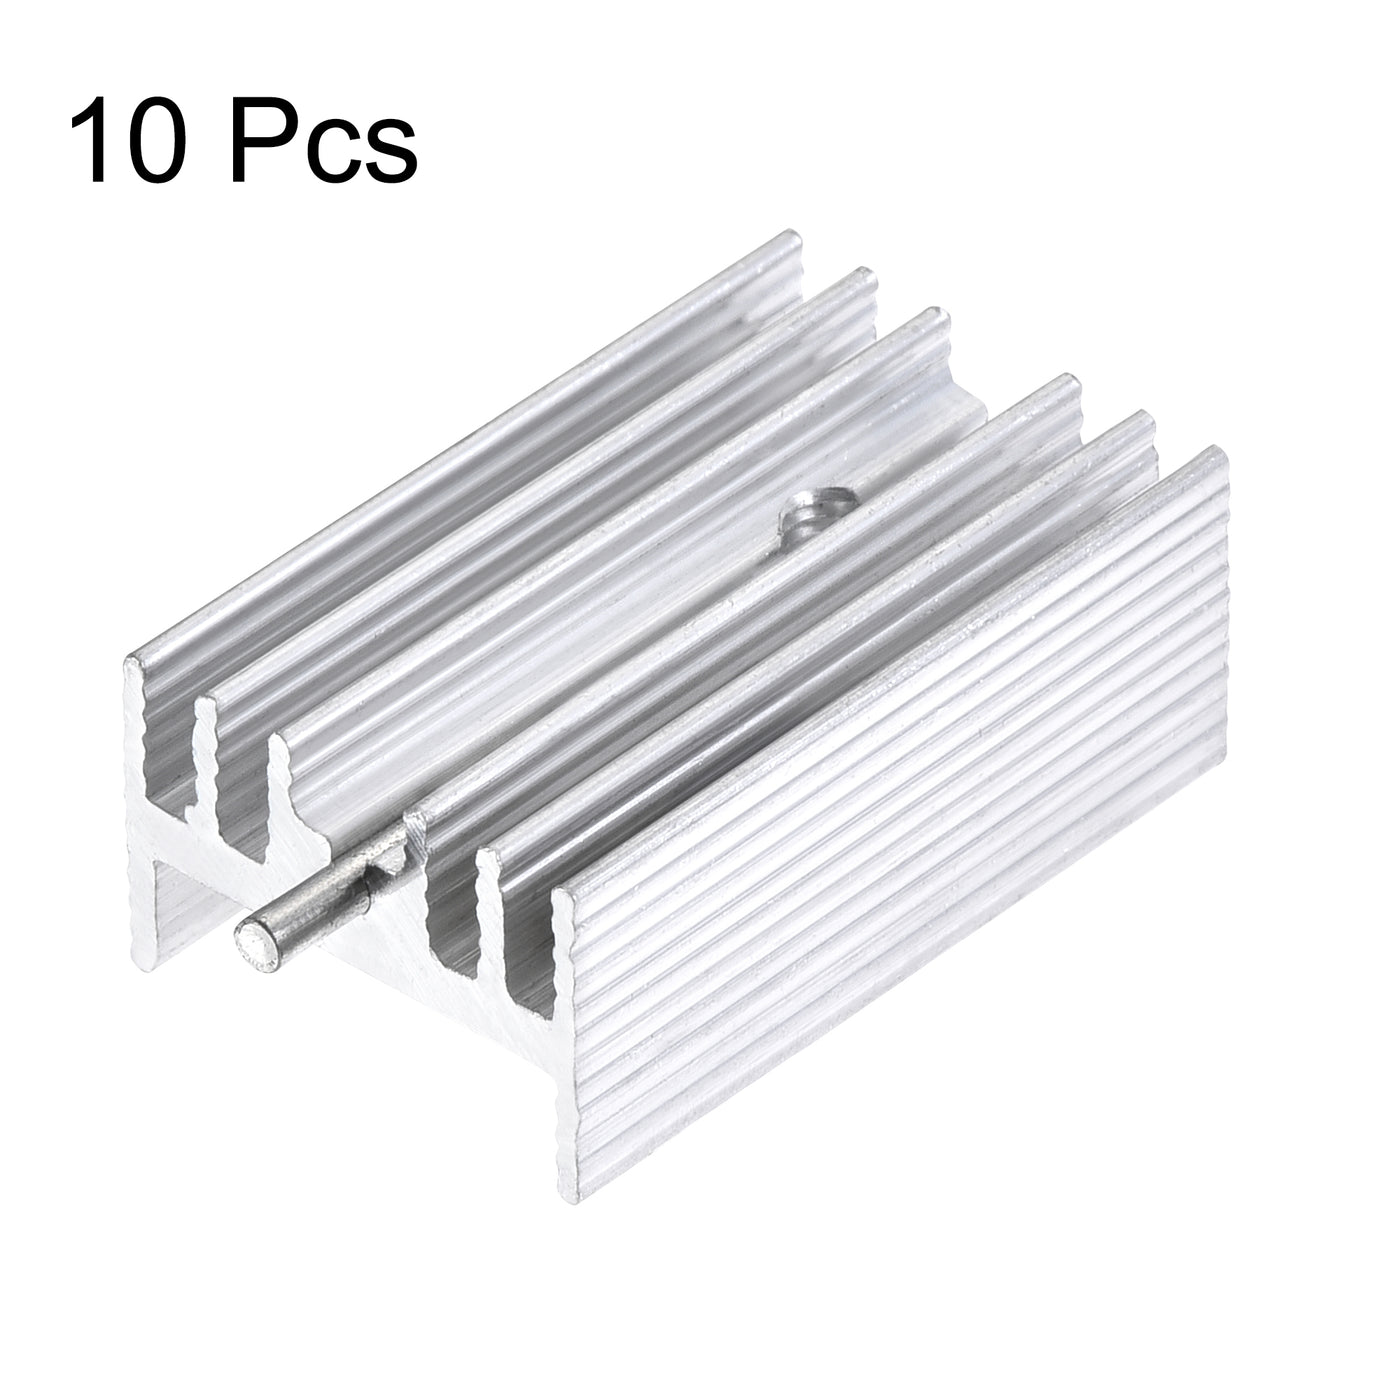 uxcell Uxcell 25x15x10mm TO-220 Aluminum Heatsink for Cooling MOSFET Transistor Diodes with a Support Pin 10pcs